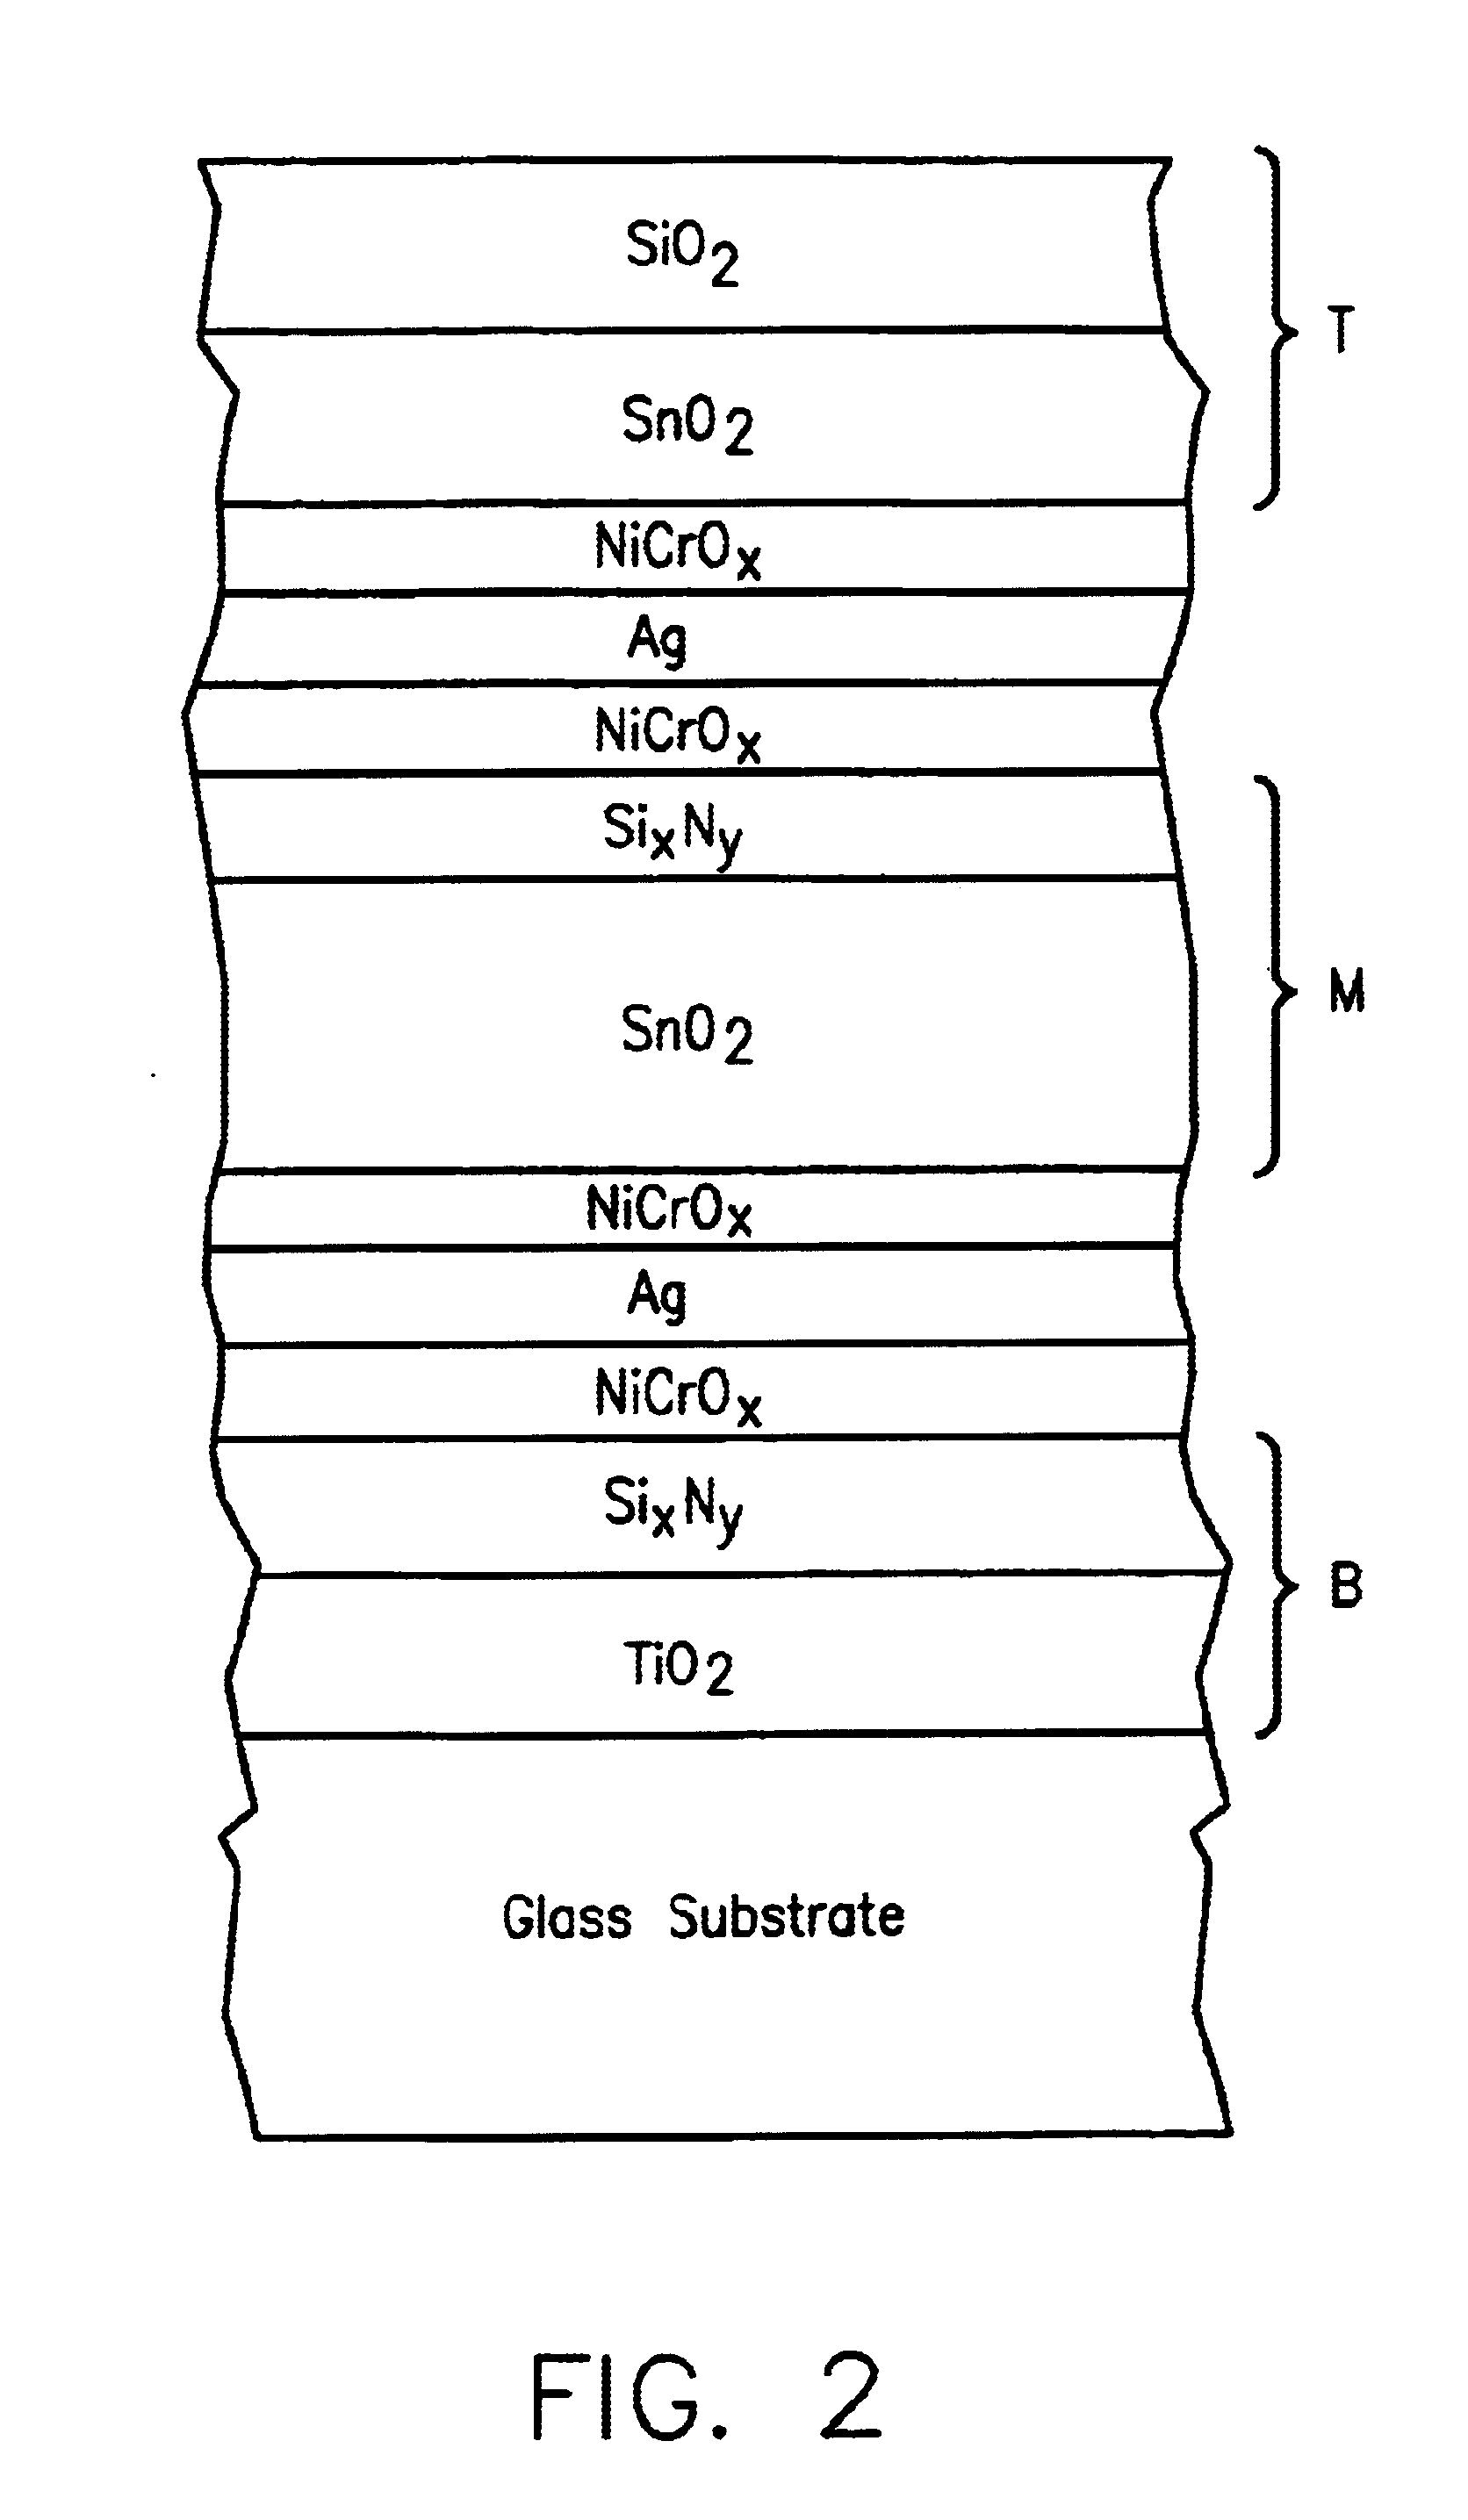 Low-e coating with high visible transmission